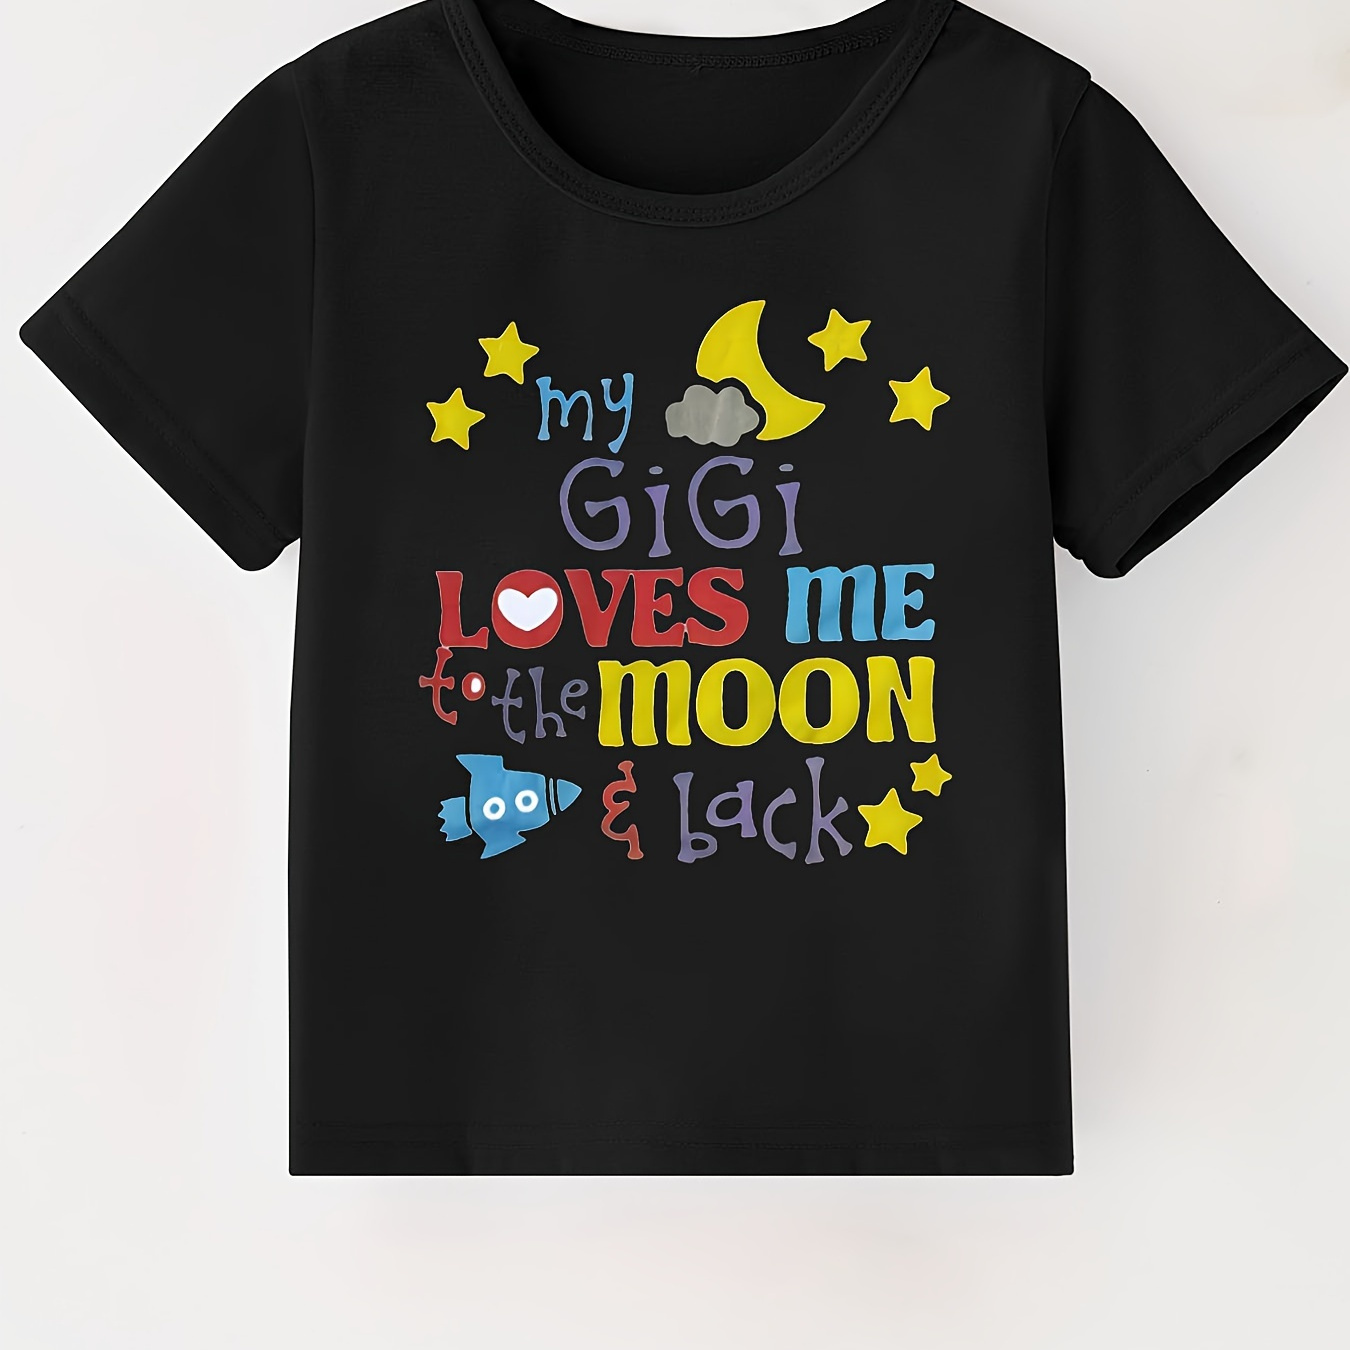 

My Gi Gi Loves Me To The Moon Back Letter Print Boys Creative T-shirt, Casual Lightweight Comfy Short Sleeve Tee Tops, Kids Clothings For Summer